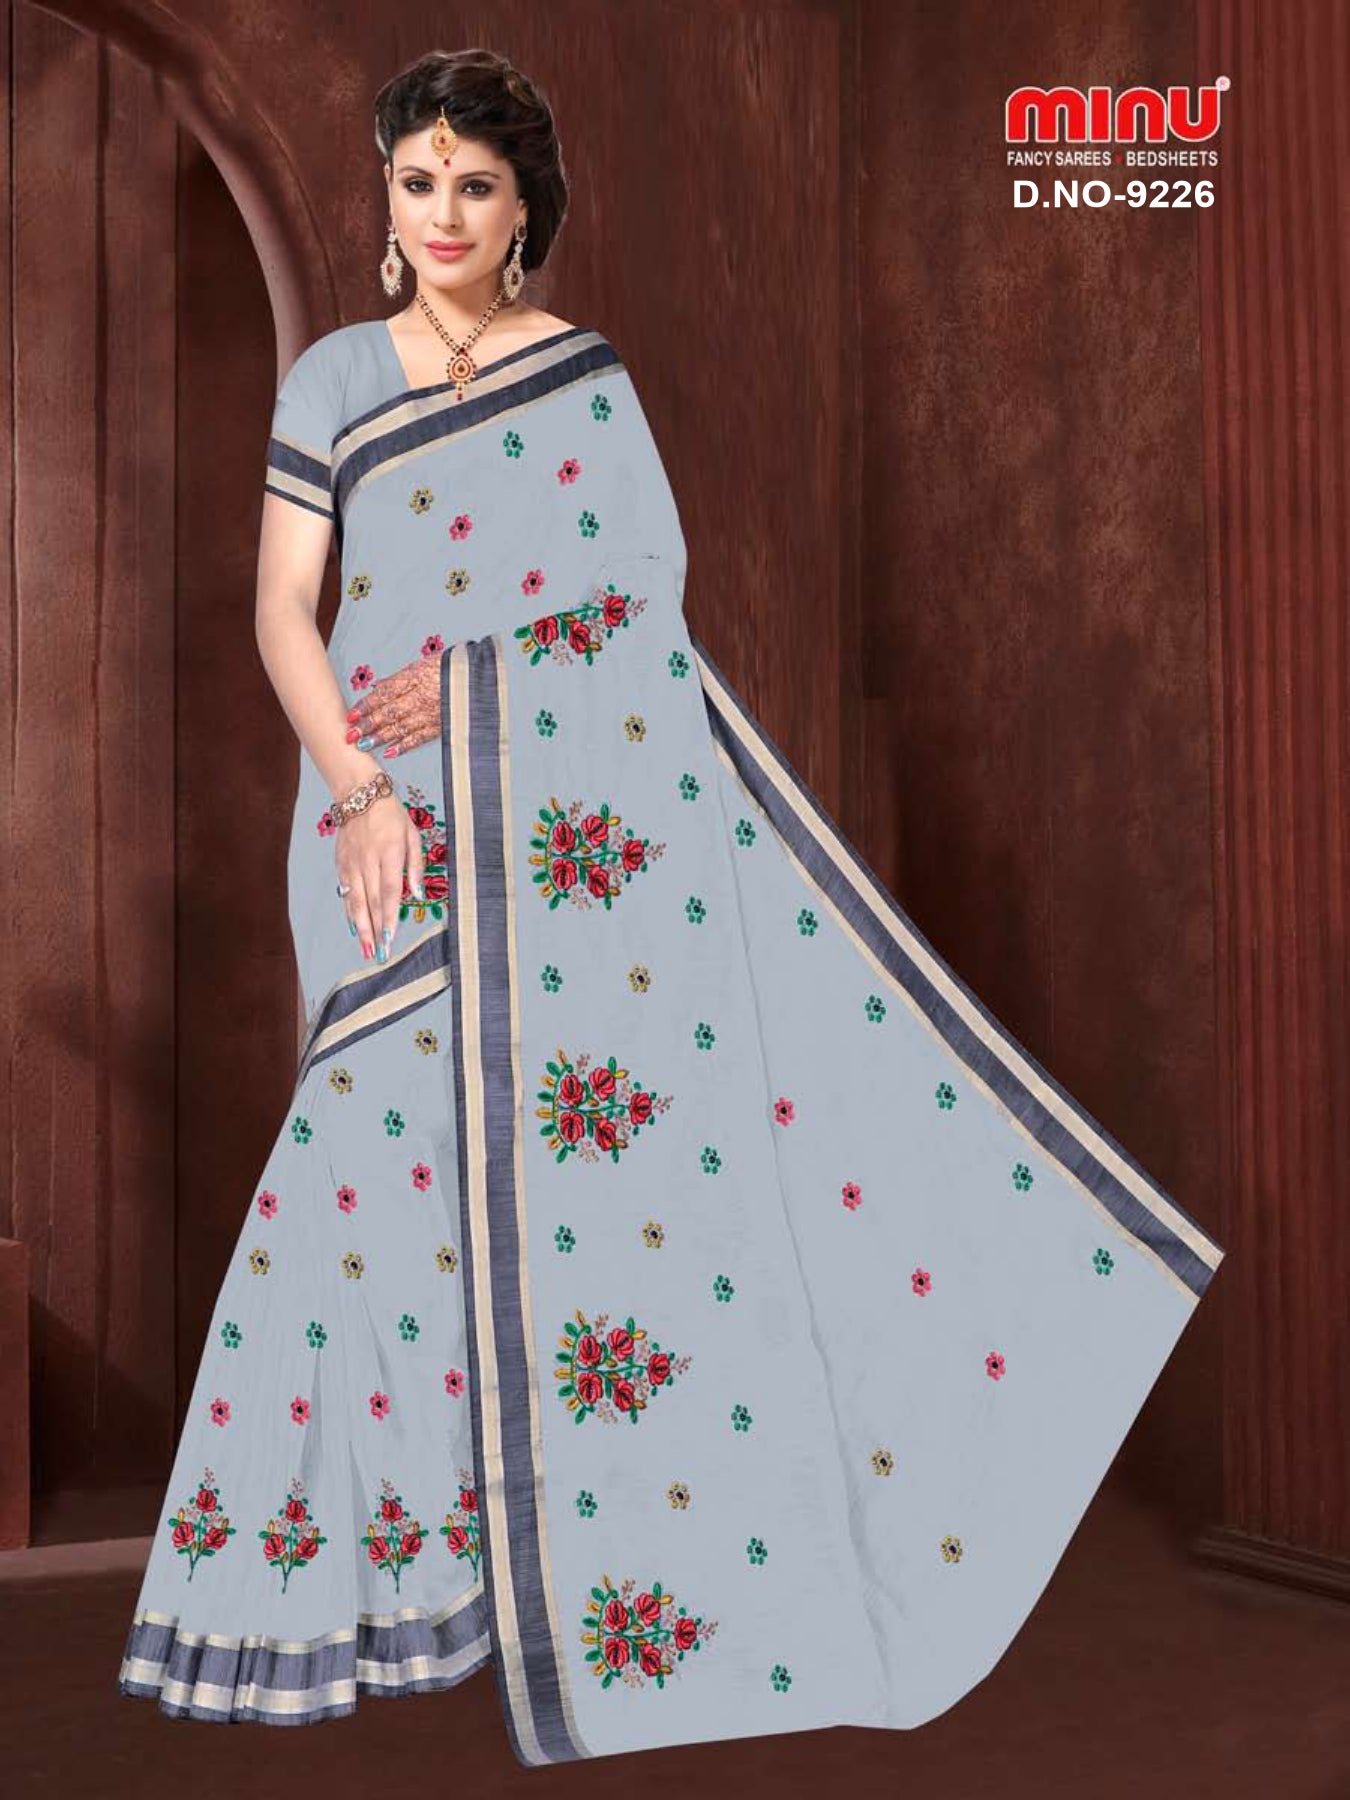 fancy saree with grey in color wearing woman image